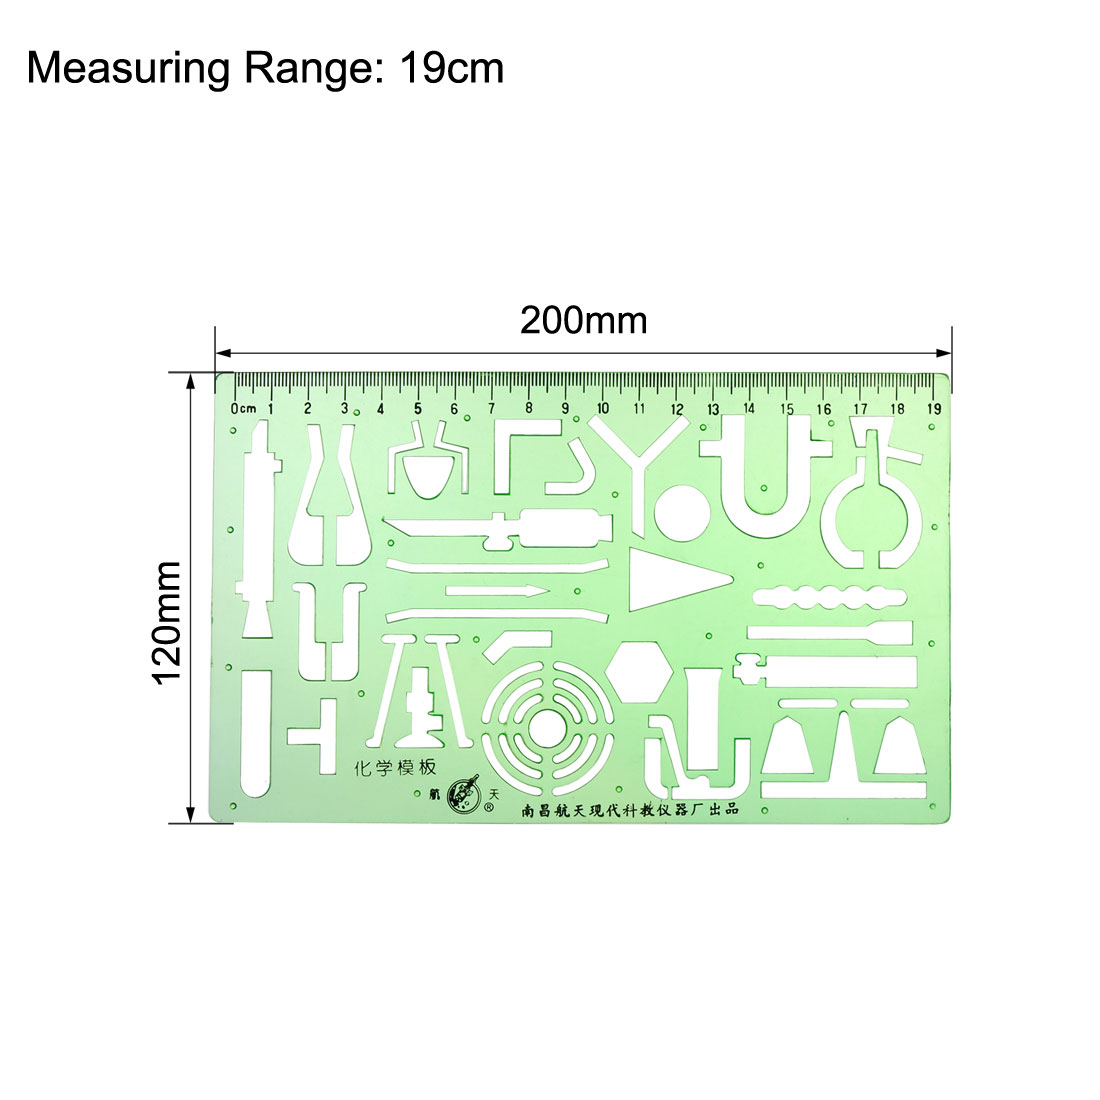 uxcell 2pcs Geometric Drawing Template Measuring Ruler 19cm 20cm Plastic for Engineering Art Design and Building Formwork